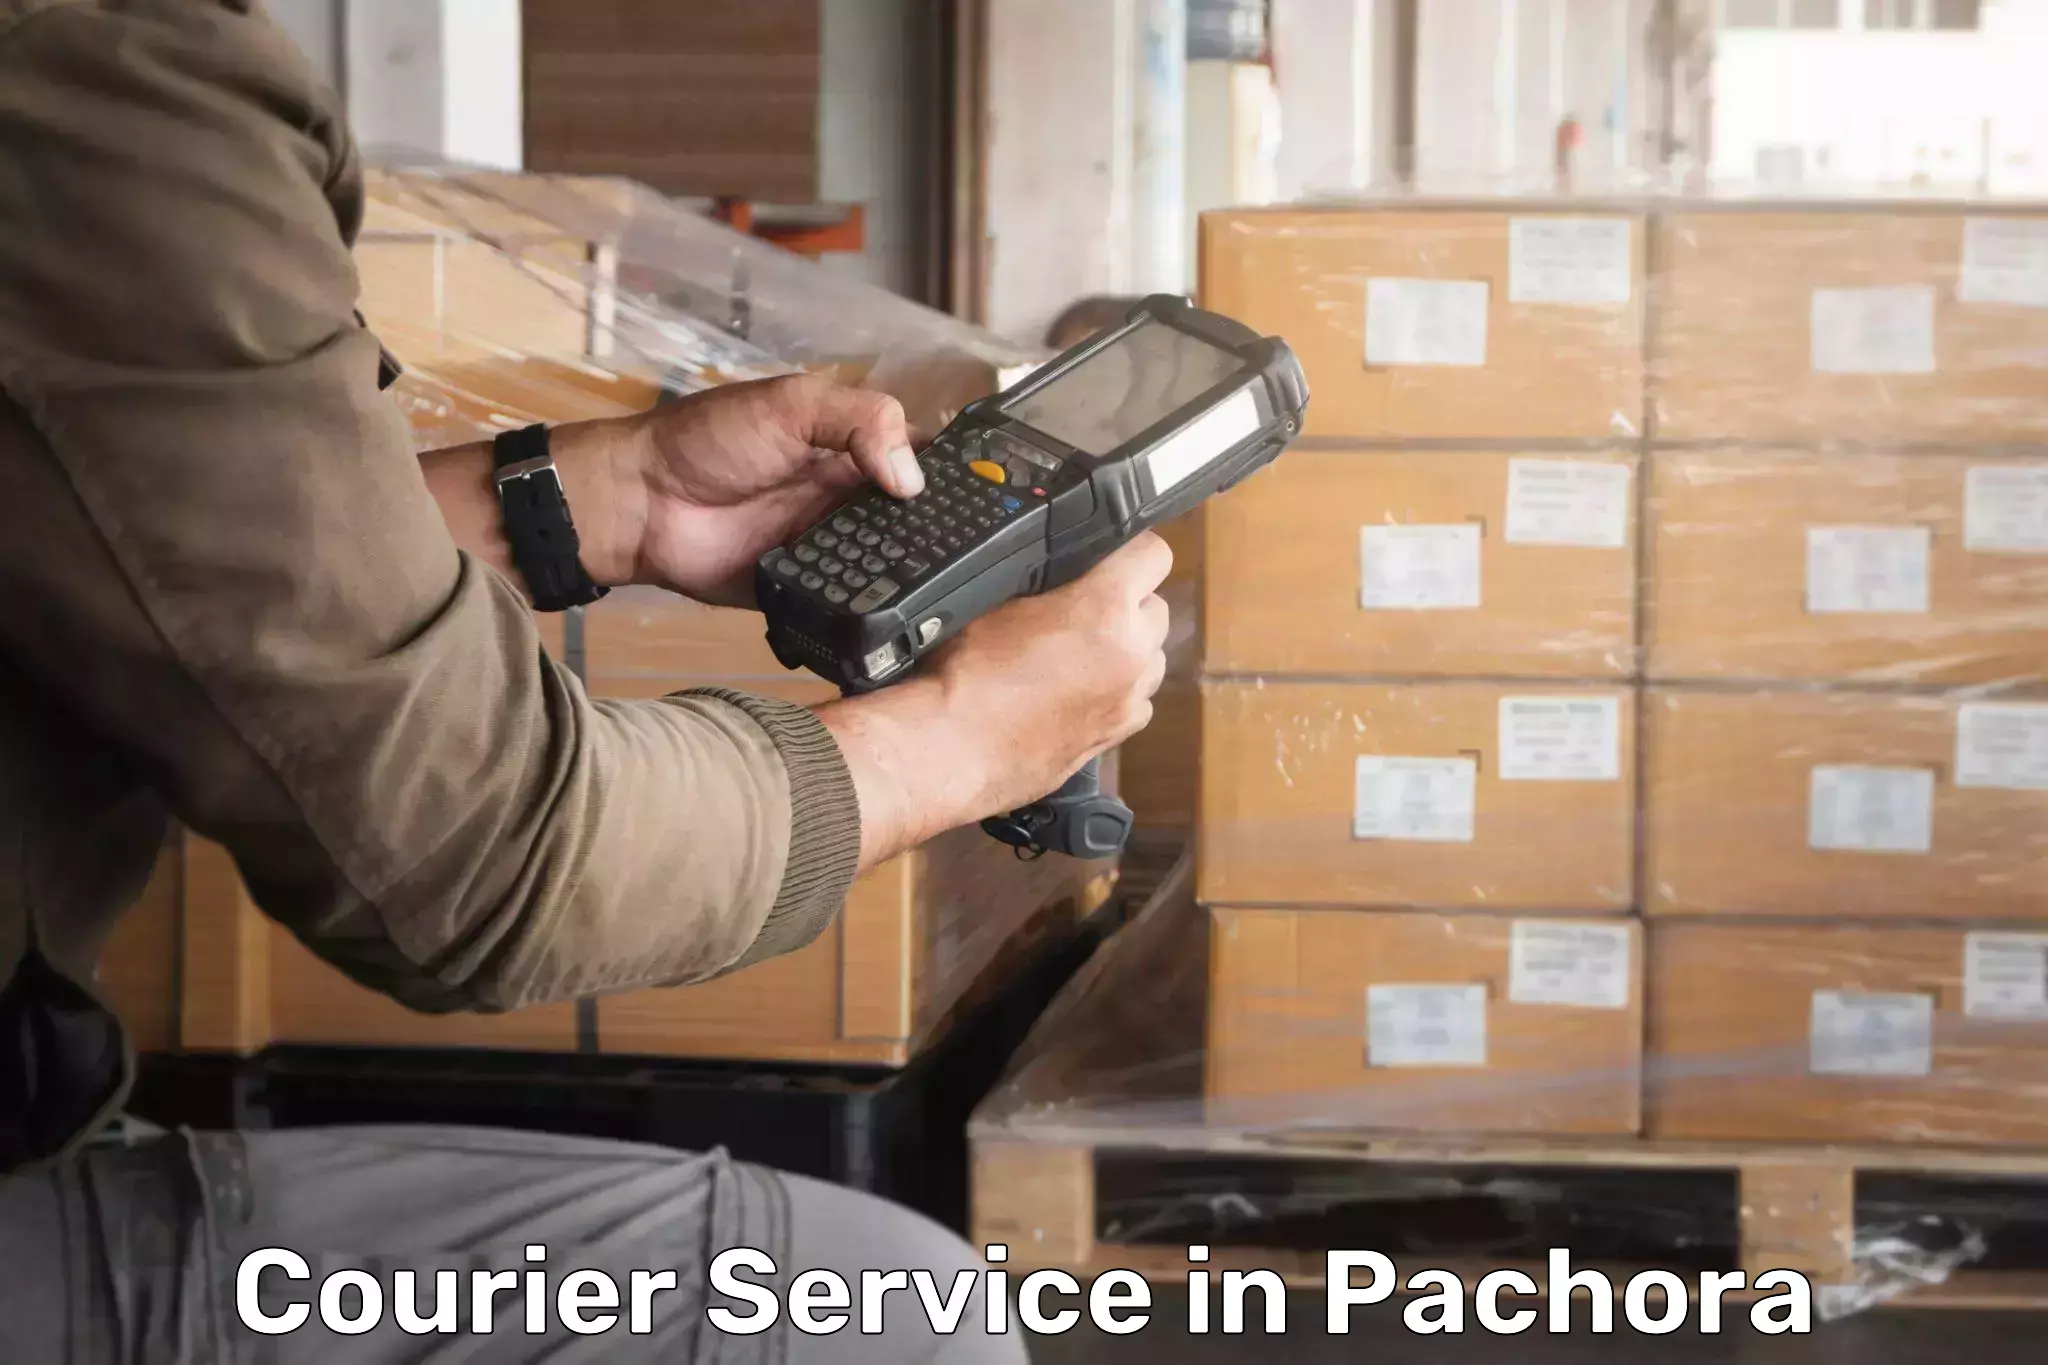 Advanced parcel tracking in Pachora